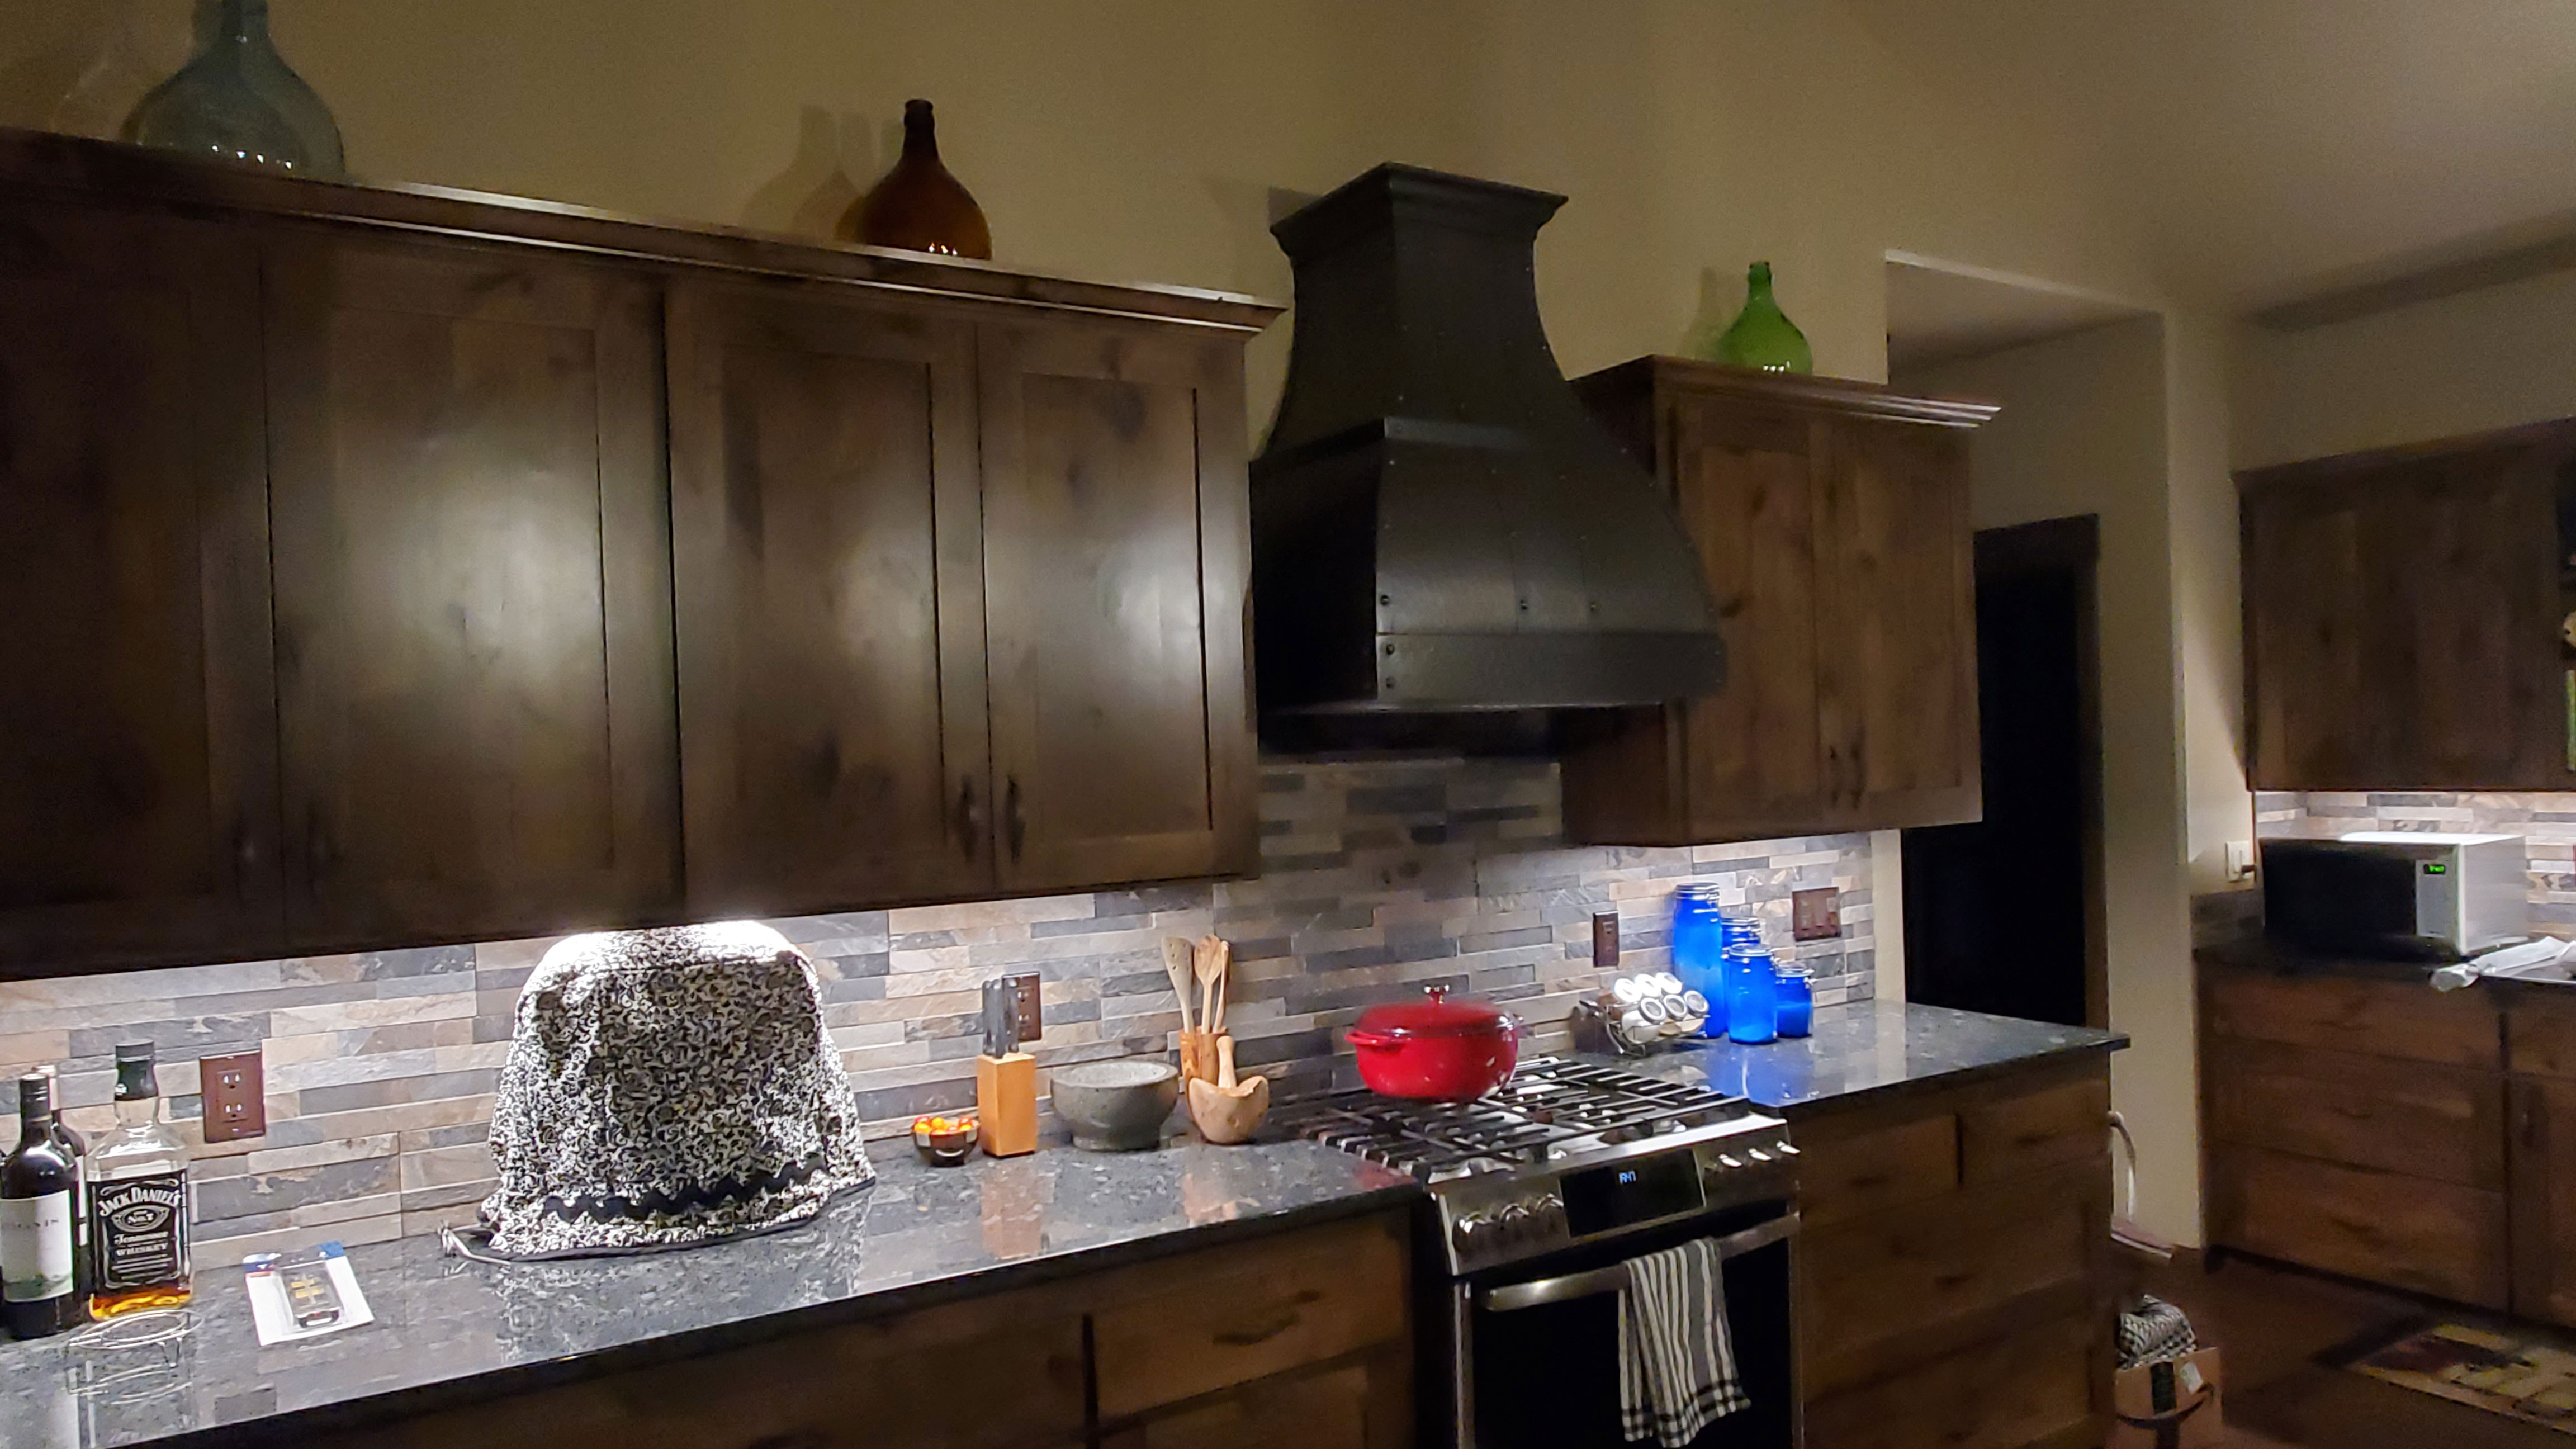 Copper range hood with brown kitchen cabinets paired with a stunning marble backsplash or a rustic brick backsplash